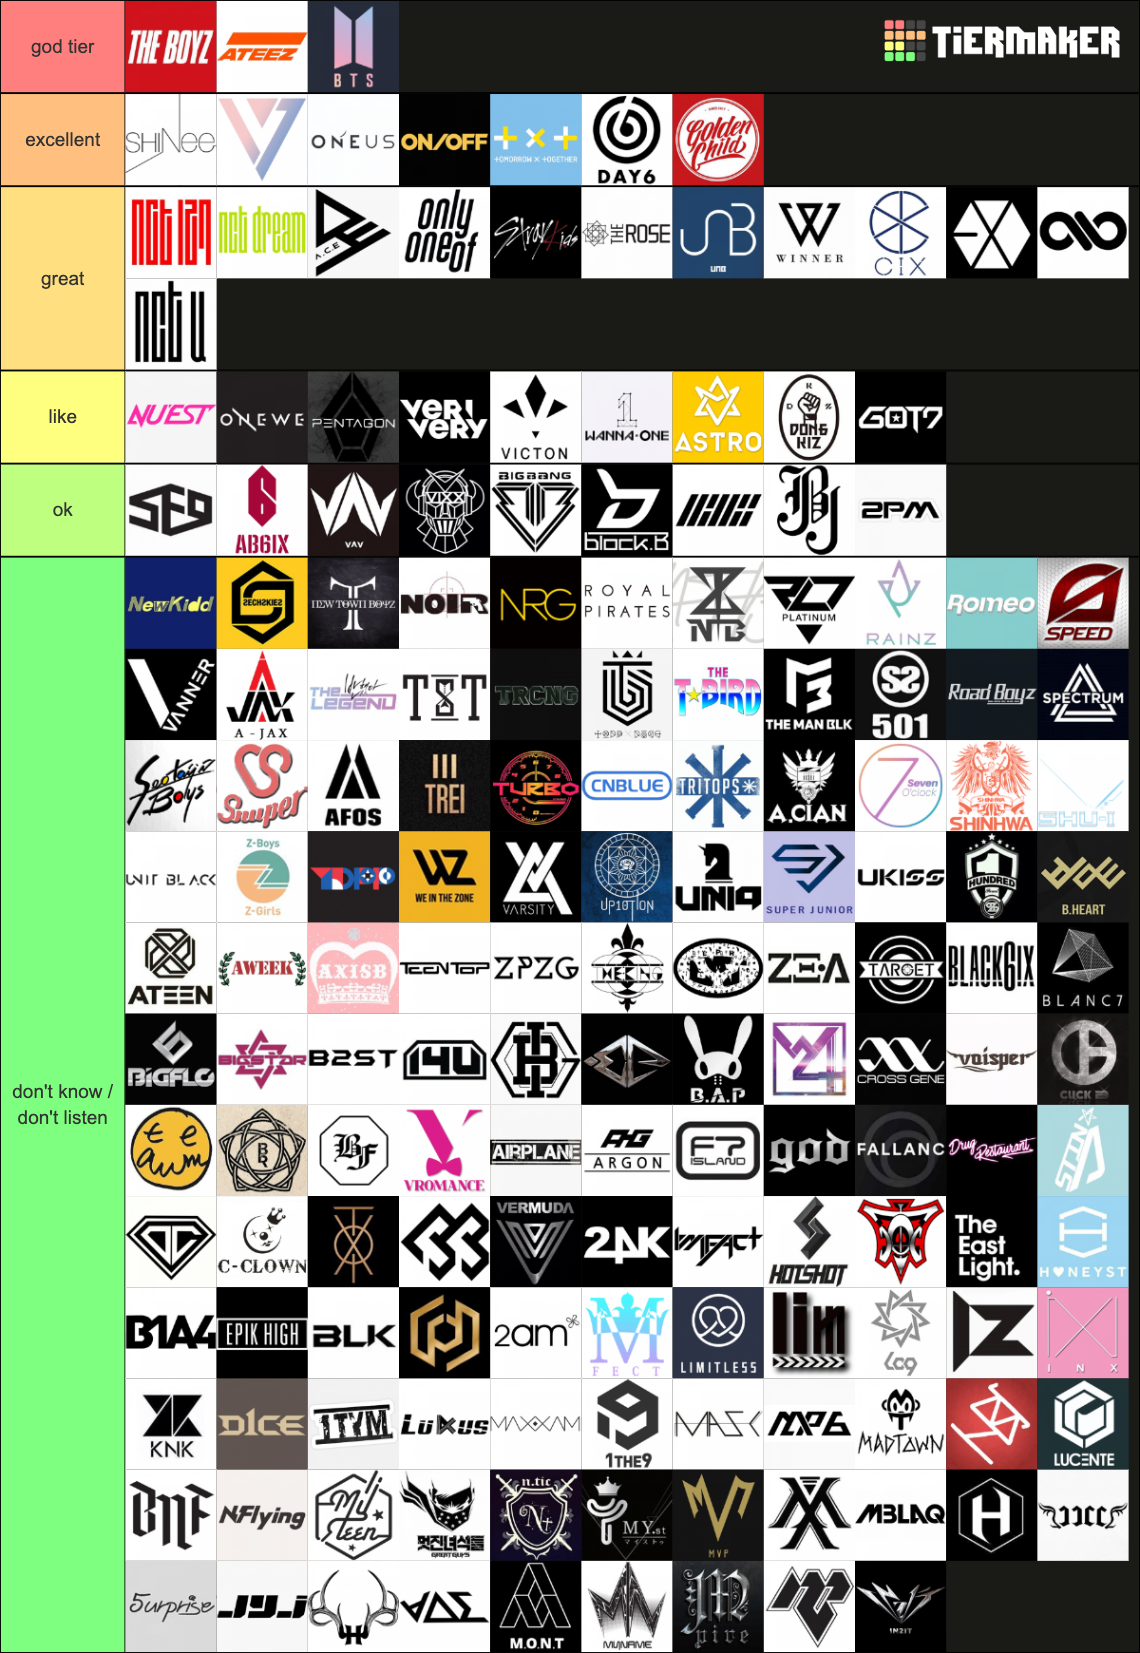 Kpop Groups Ranking Tier List Community Rankings Tiermaker Hot Sex Picture